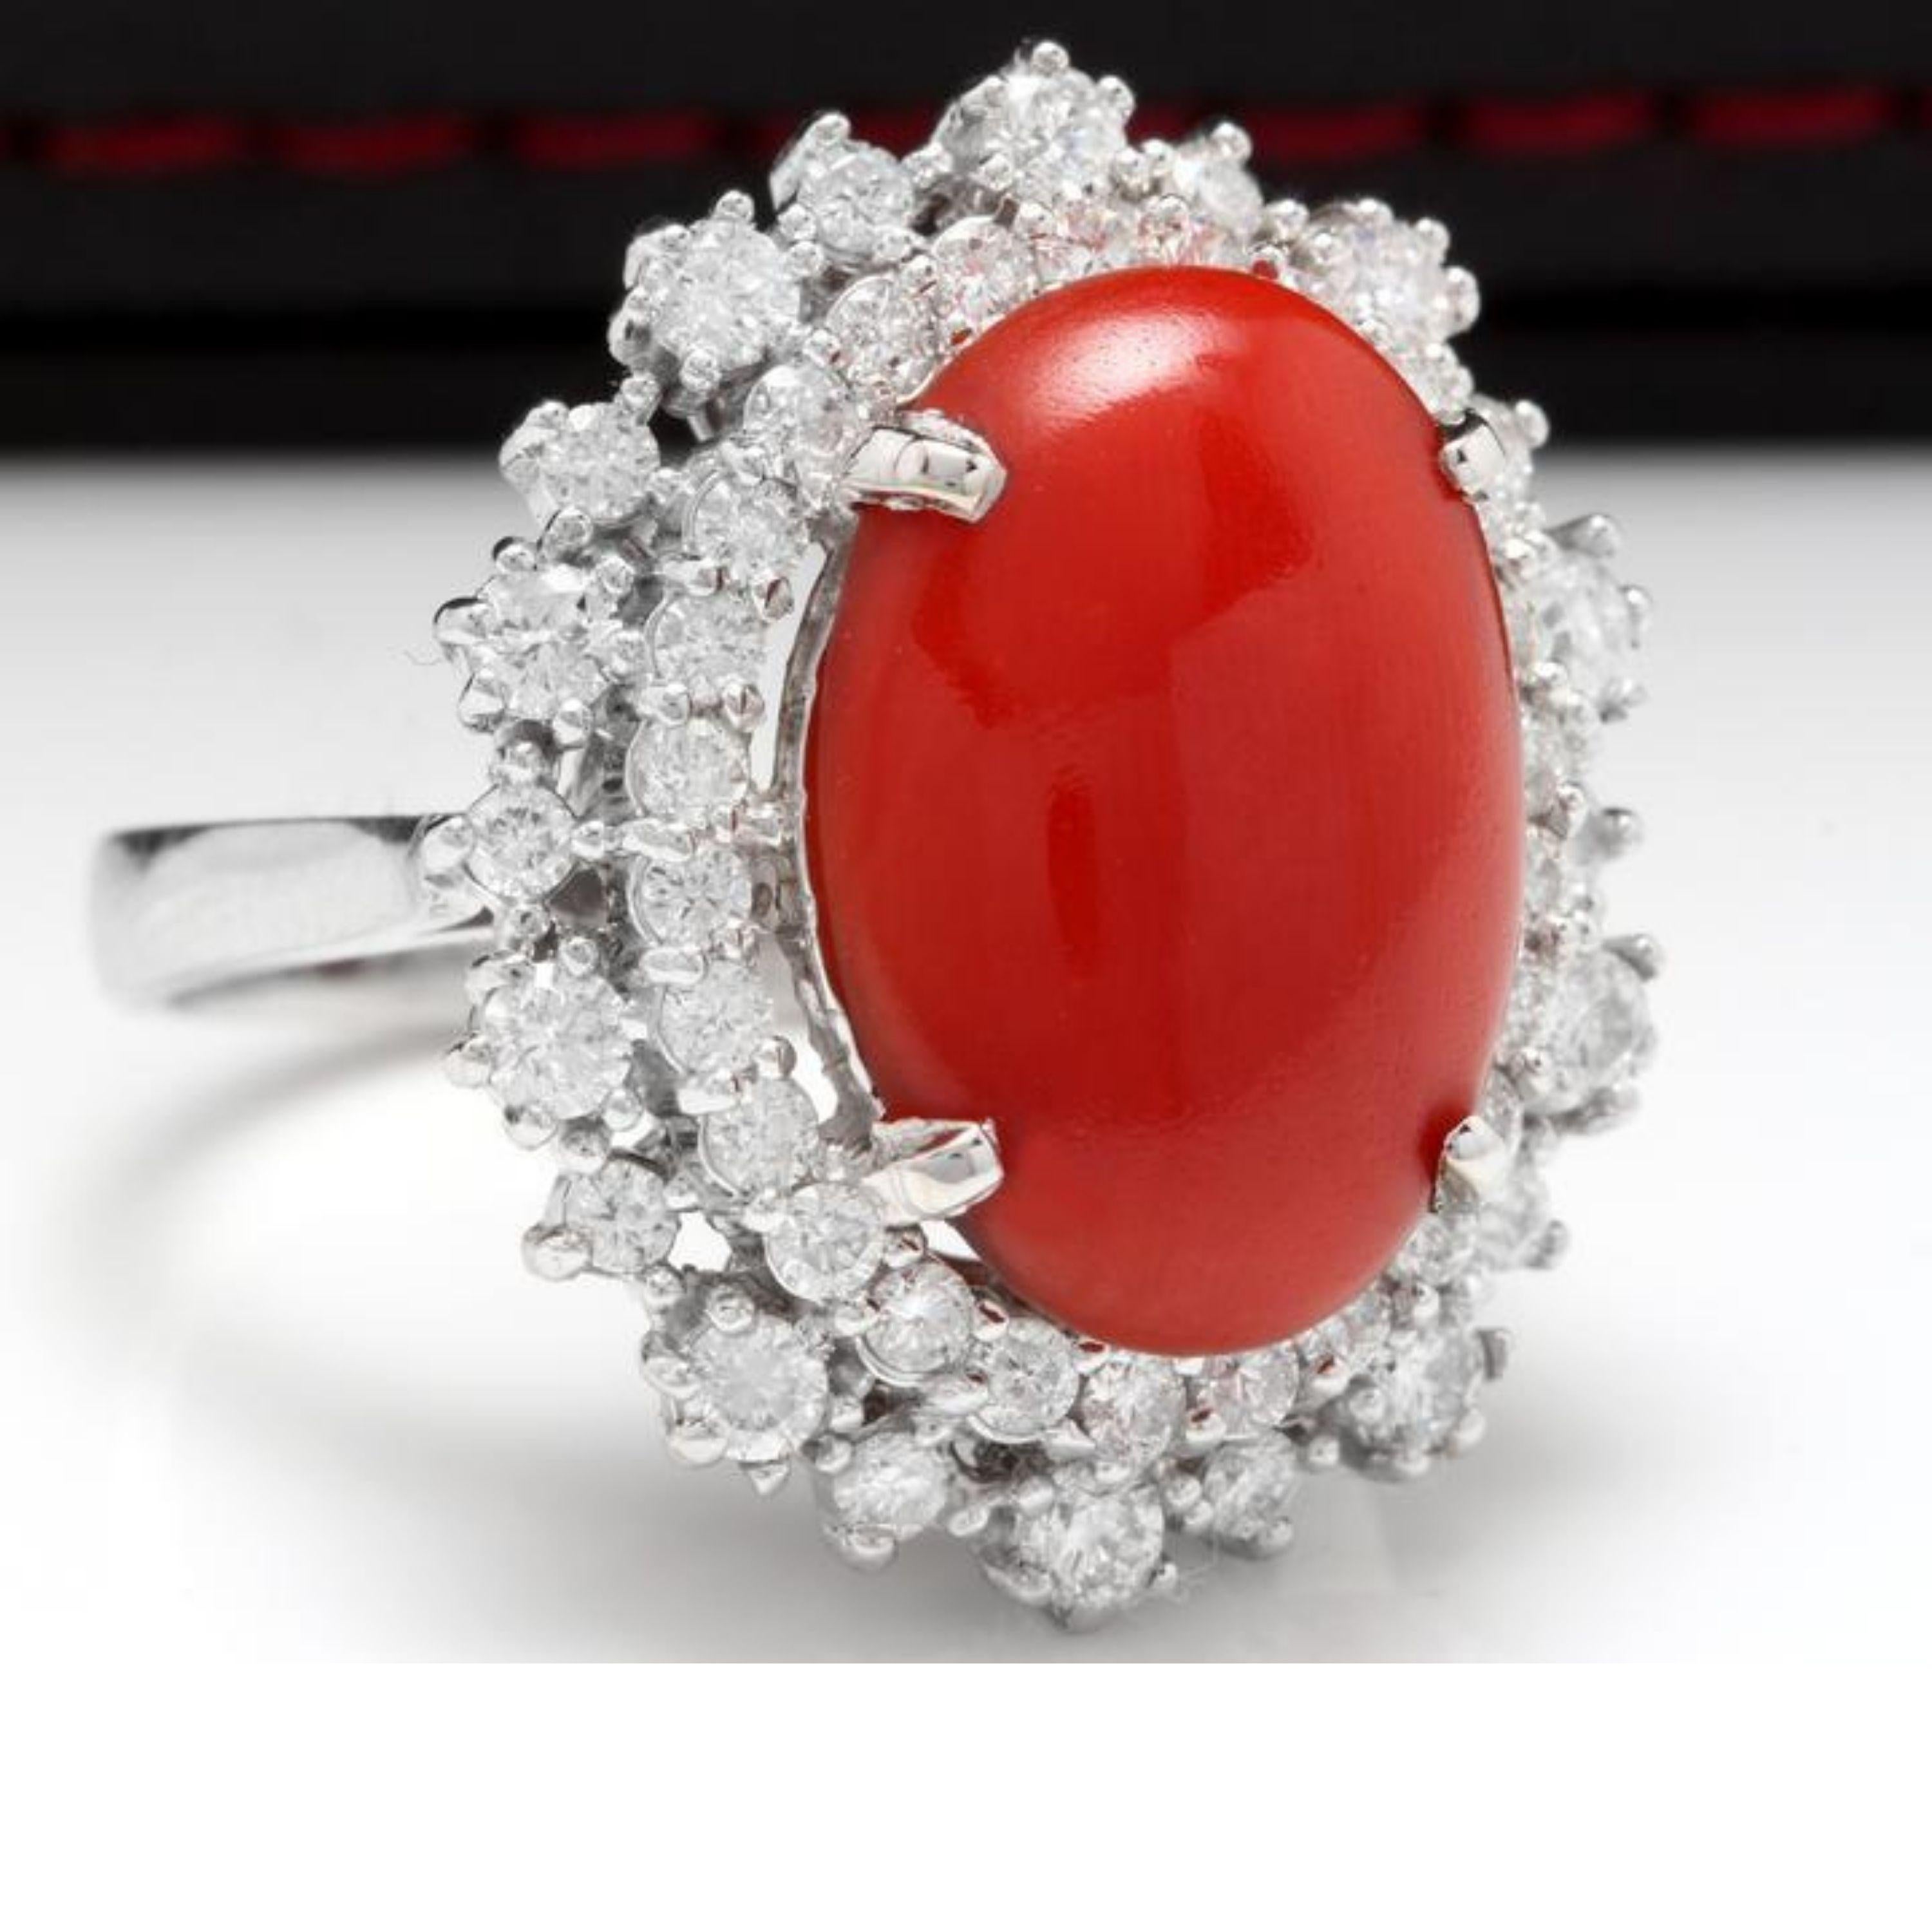 8.00 Carats Impressive Coral and Diamond 14K White Gold Ring

Total Natural Oval Coral Weight is: 6.50 Carats

Coral Measures: 15 x 11mm

Natural Round Diamonds Weight: 1.50 Carats (color G / Clarity SI1)

Ring size: 7 (we offer free re-sizing upon